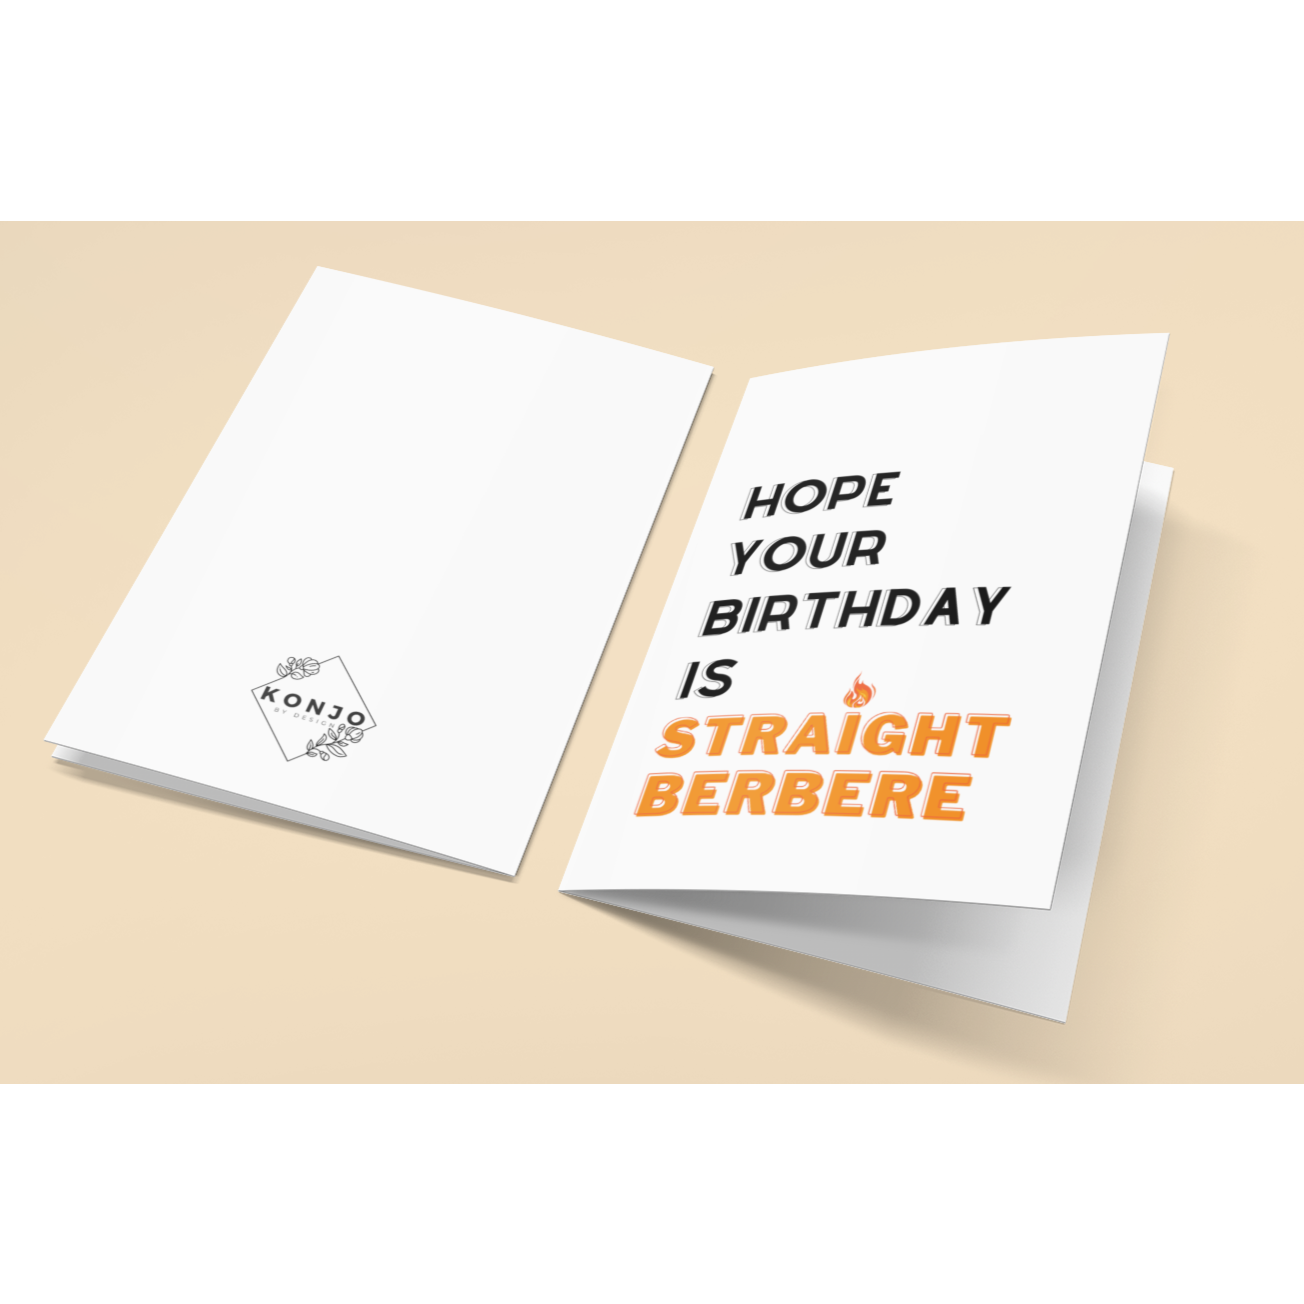 Straight Berbebe Birthday Card Habesha Ethiopian Eritrean Greeting Card Shop our original art, greeting cards, coffee mugs, stickers, hats, shirts and crewnecks all inspired by our Eritrean and Ethiopian-American perspectives, experiences, and points of view. Perfect Habesha Gift